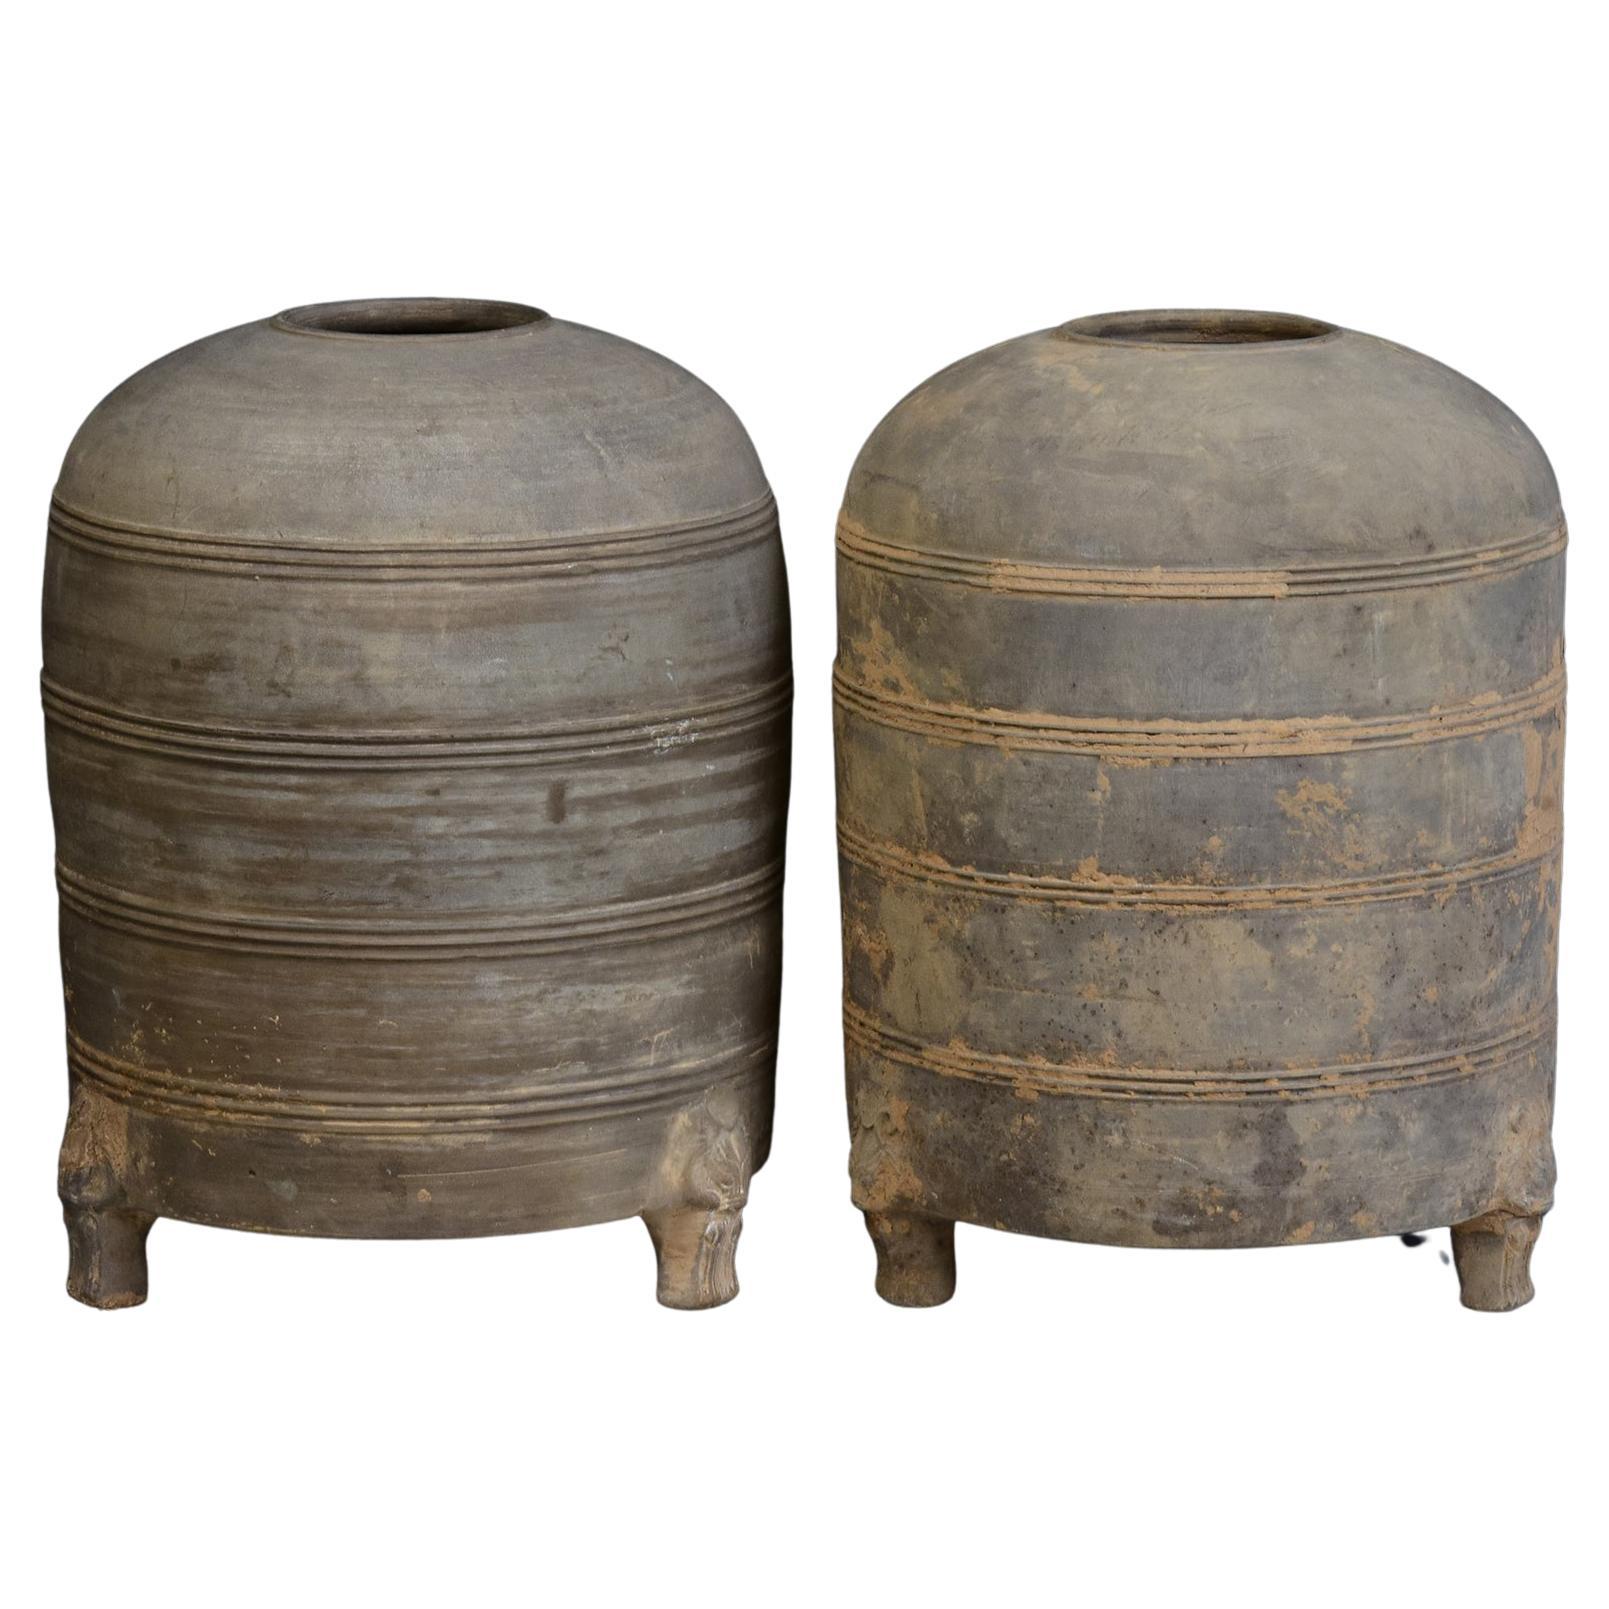 Han Dynasty, A Pair of Antique Chinese Pottery Granary Jars For Sale